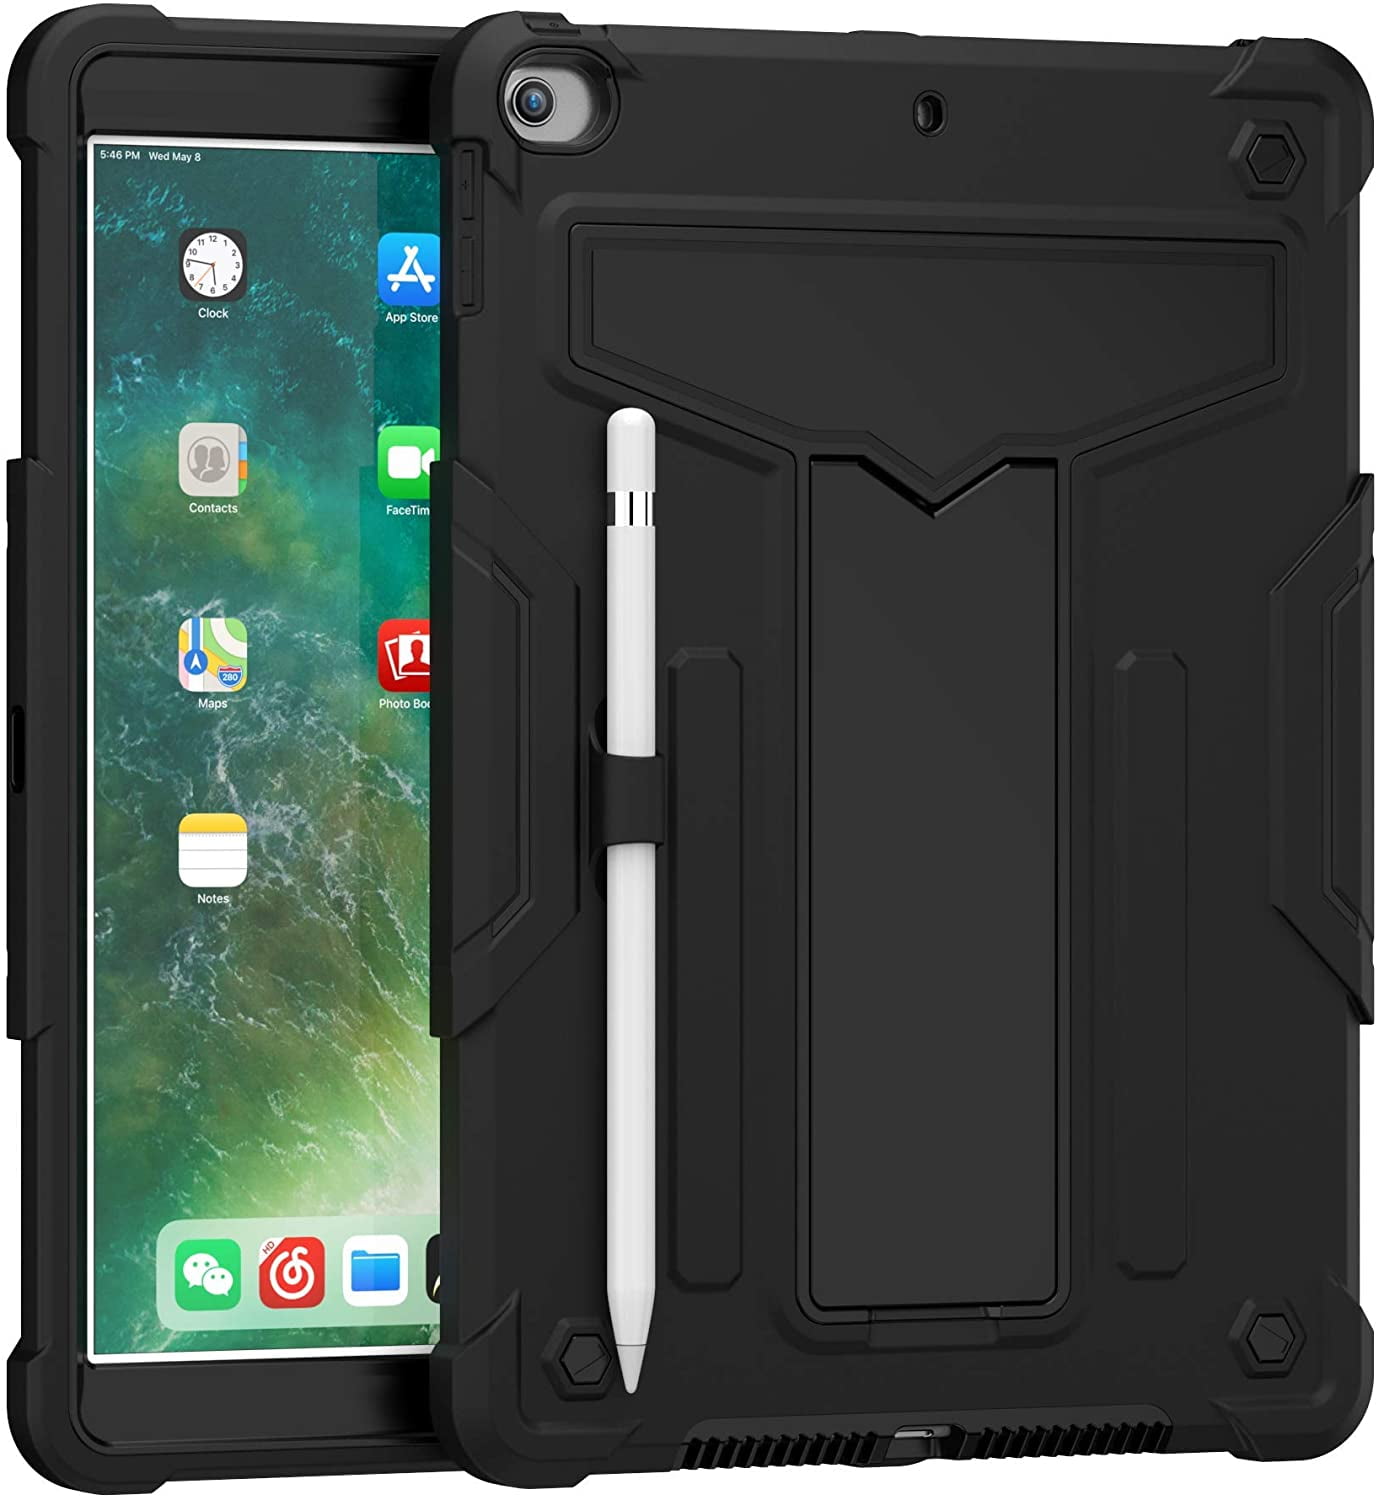 EpicGadget Case for iPad 10.2 (9th/8th/7th Gen) Protective Rugged Hybrid Case with Kickstand Pencil Holder Cover for Apple 10.2 Inch iPad 9th/8th/7th Generation 2021/2020/2019 Release (Black/Black)